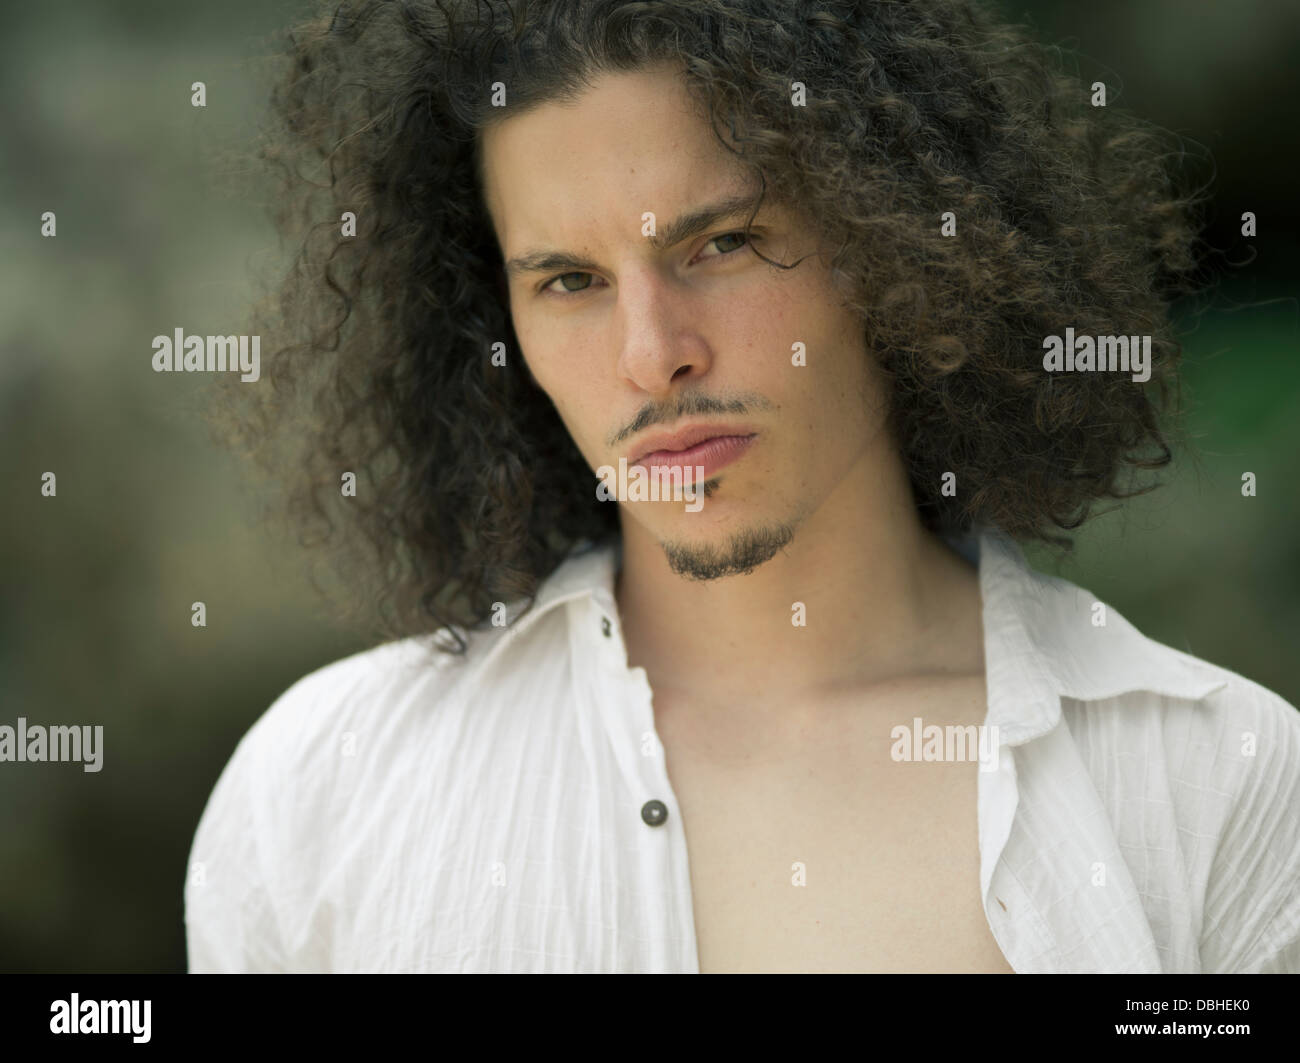 Egyptian American Man with long wavy hair beard and mustache wearing unbuttoned short sleeve white cotton shirt Stock Photo